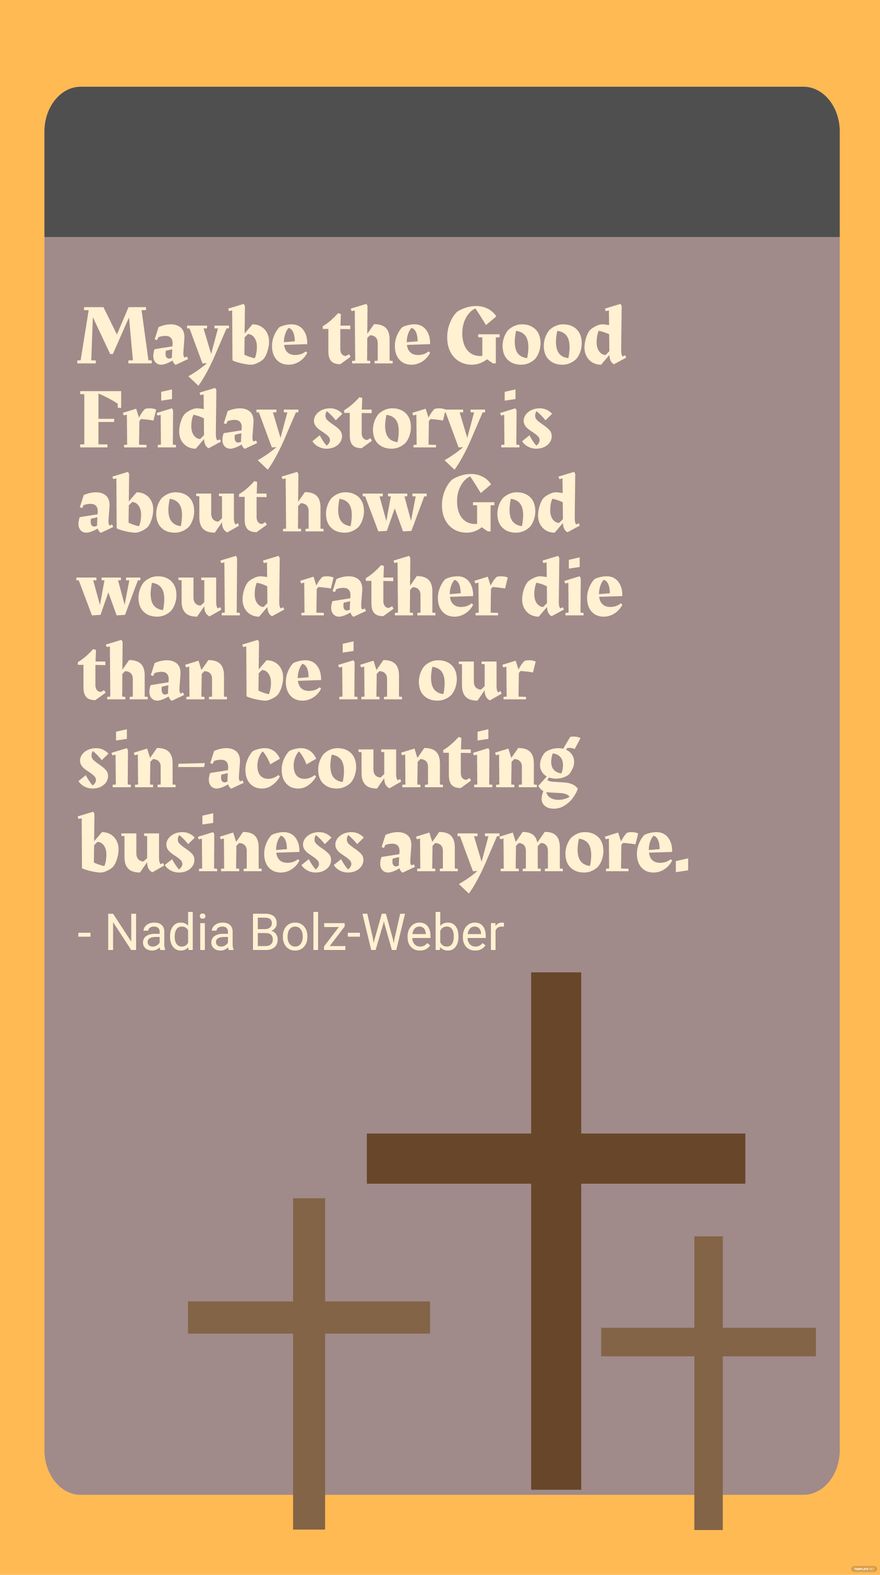 Free Nadia Bolz-Weber - Maybe the Good Friday story is about how God would rather die than be in our sin-accounting business anymore.